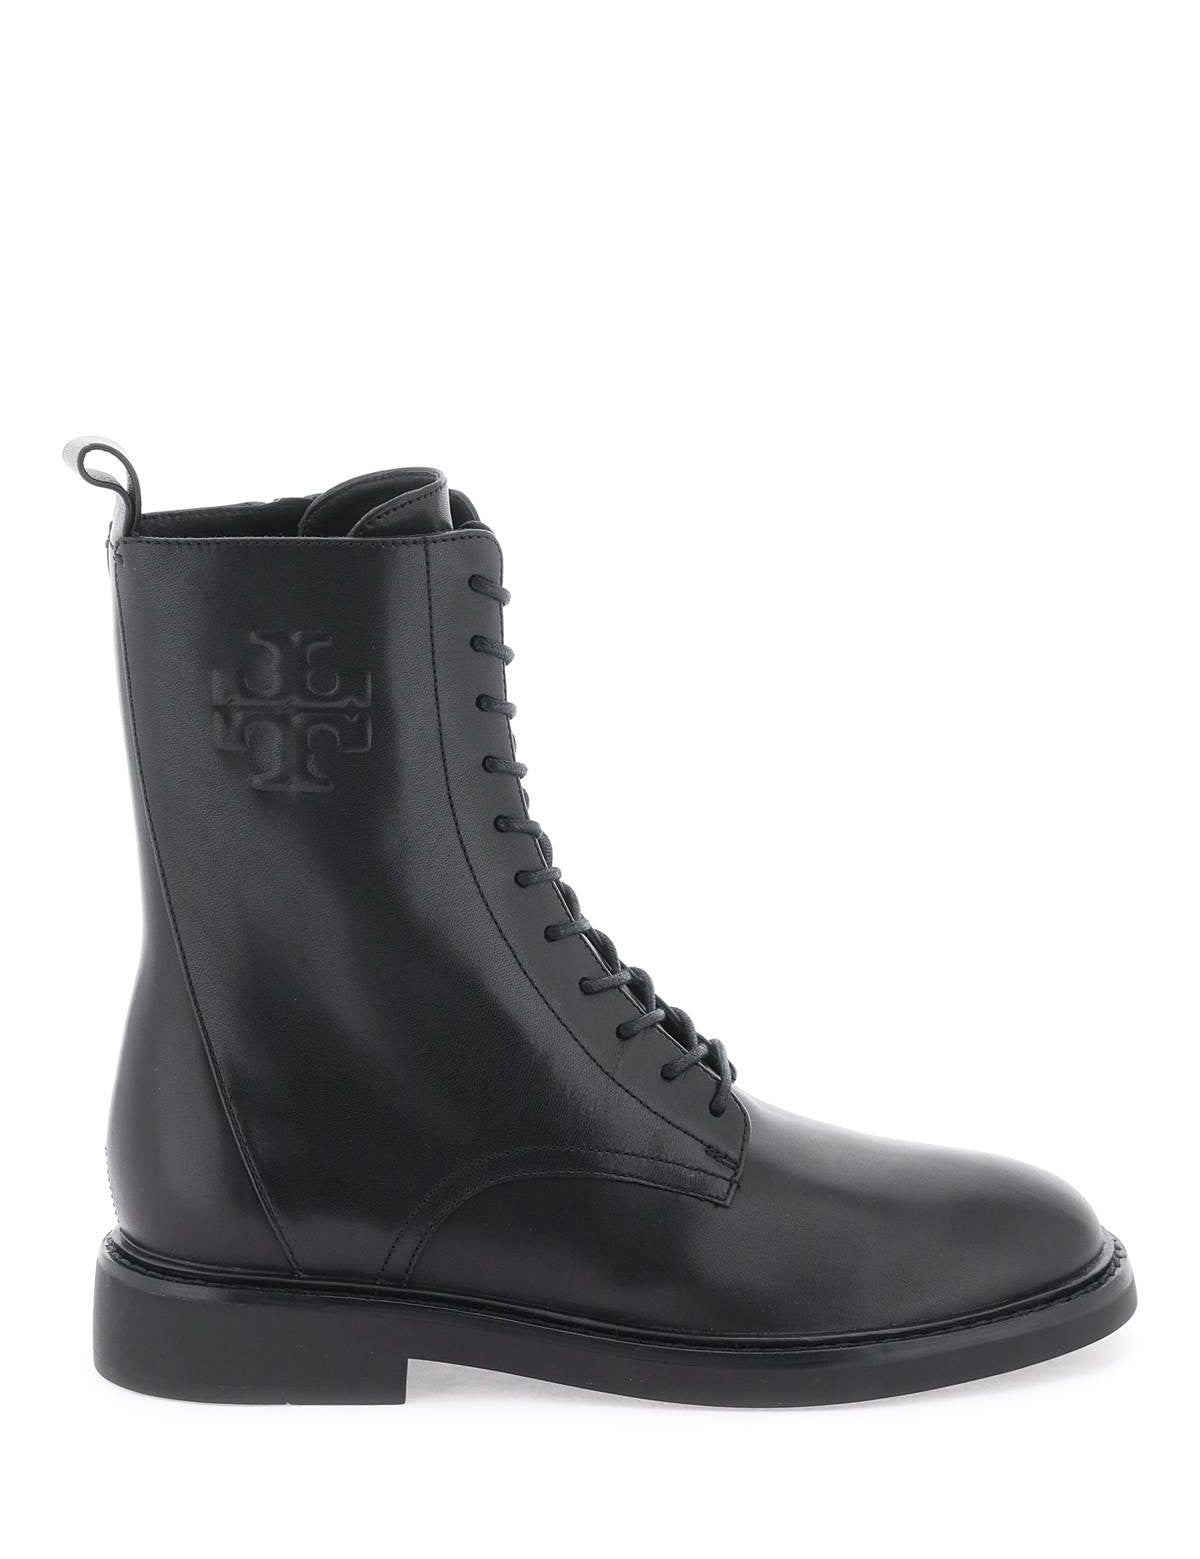 tory-burch-double-t-combat-boots.jpg